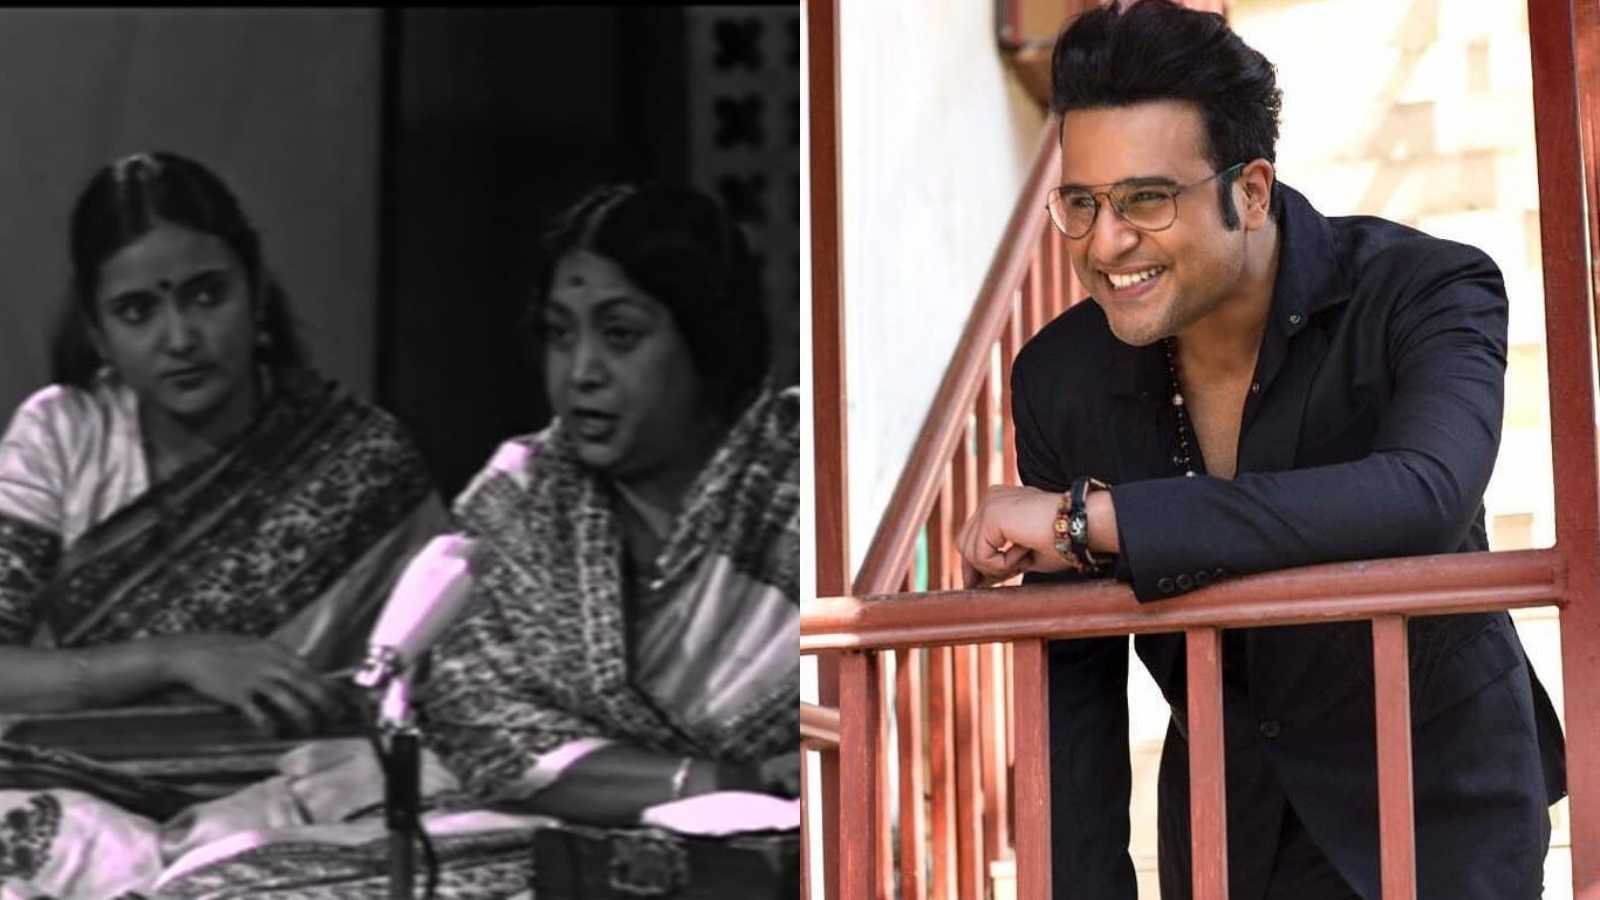 An emotional Krushna Abhishek reveals he saw his mother live for the first time in an old Doordarshan video recently after losing her when he was 2